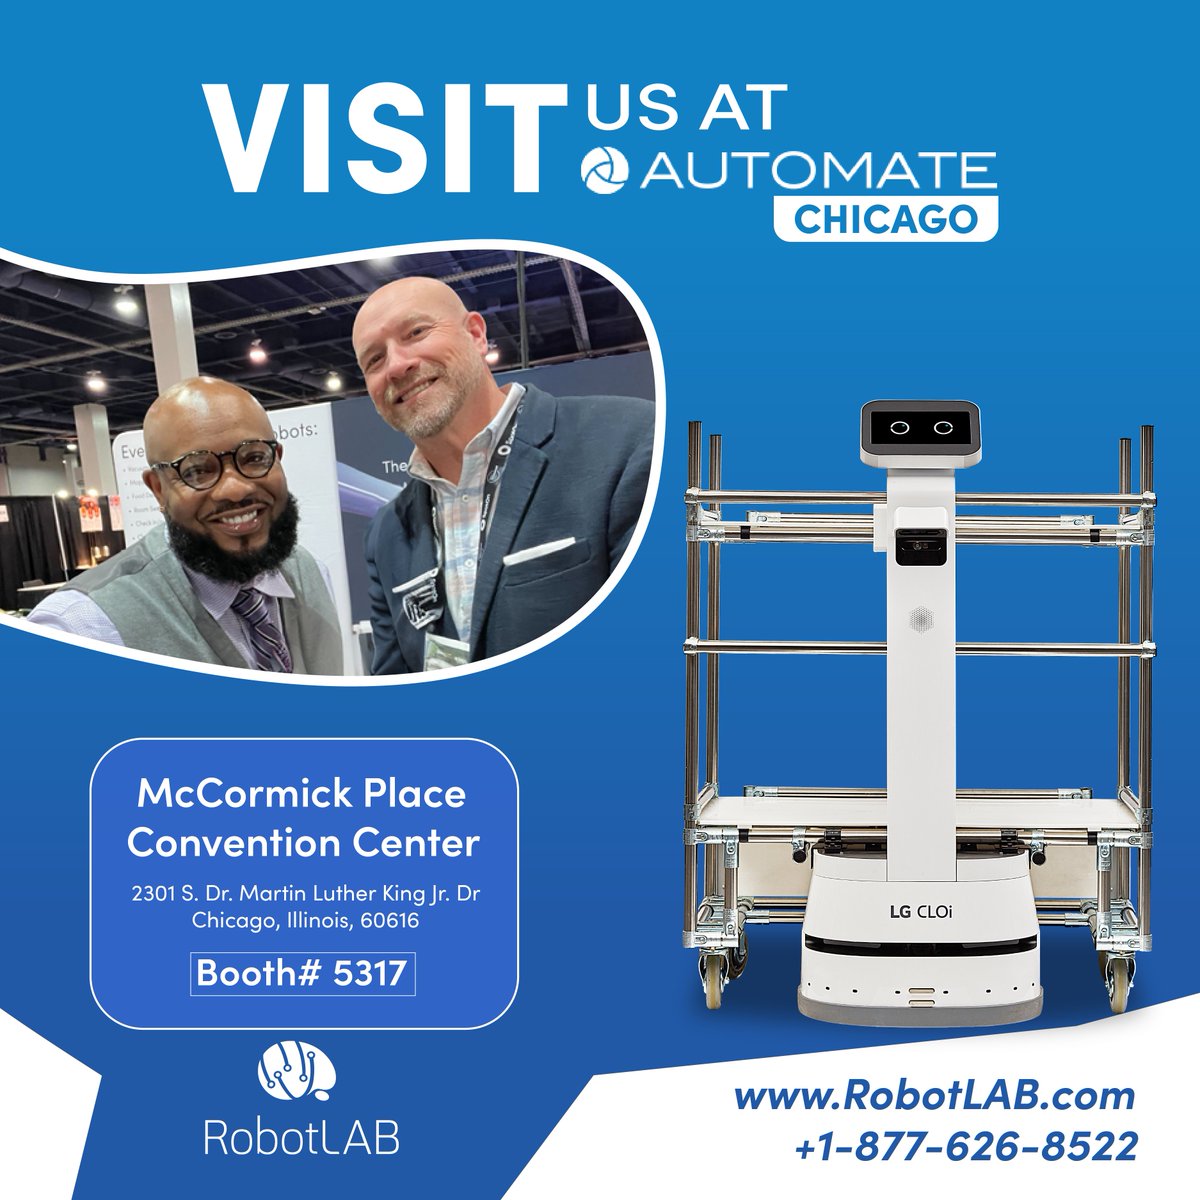 Exciting news! Mark your calendars for Automate Conference in Chicago 😍 ✨ Get ready to be amazed by our fantastic robots in action! 🤖